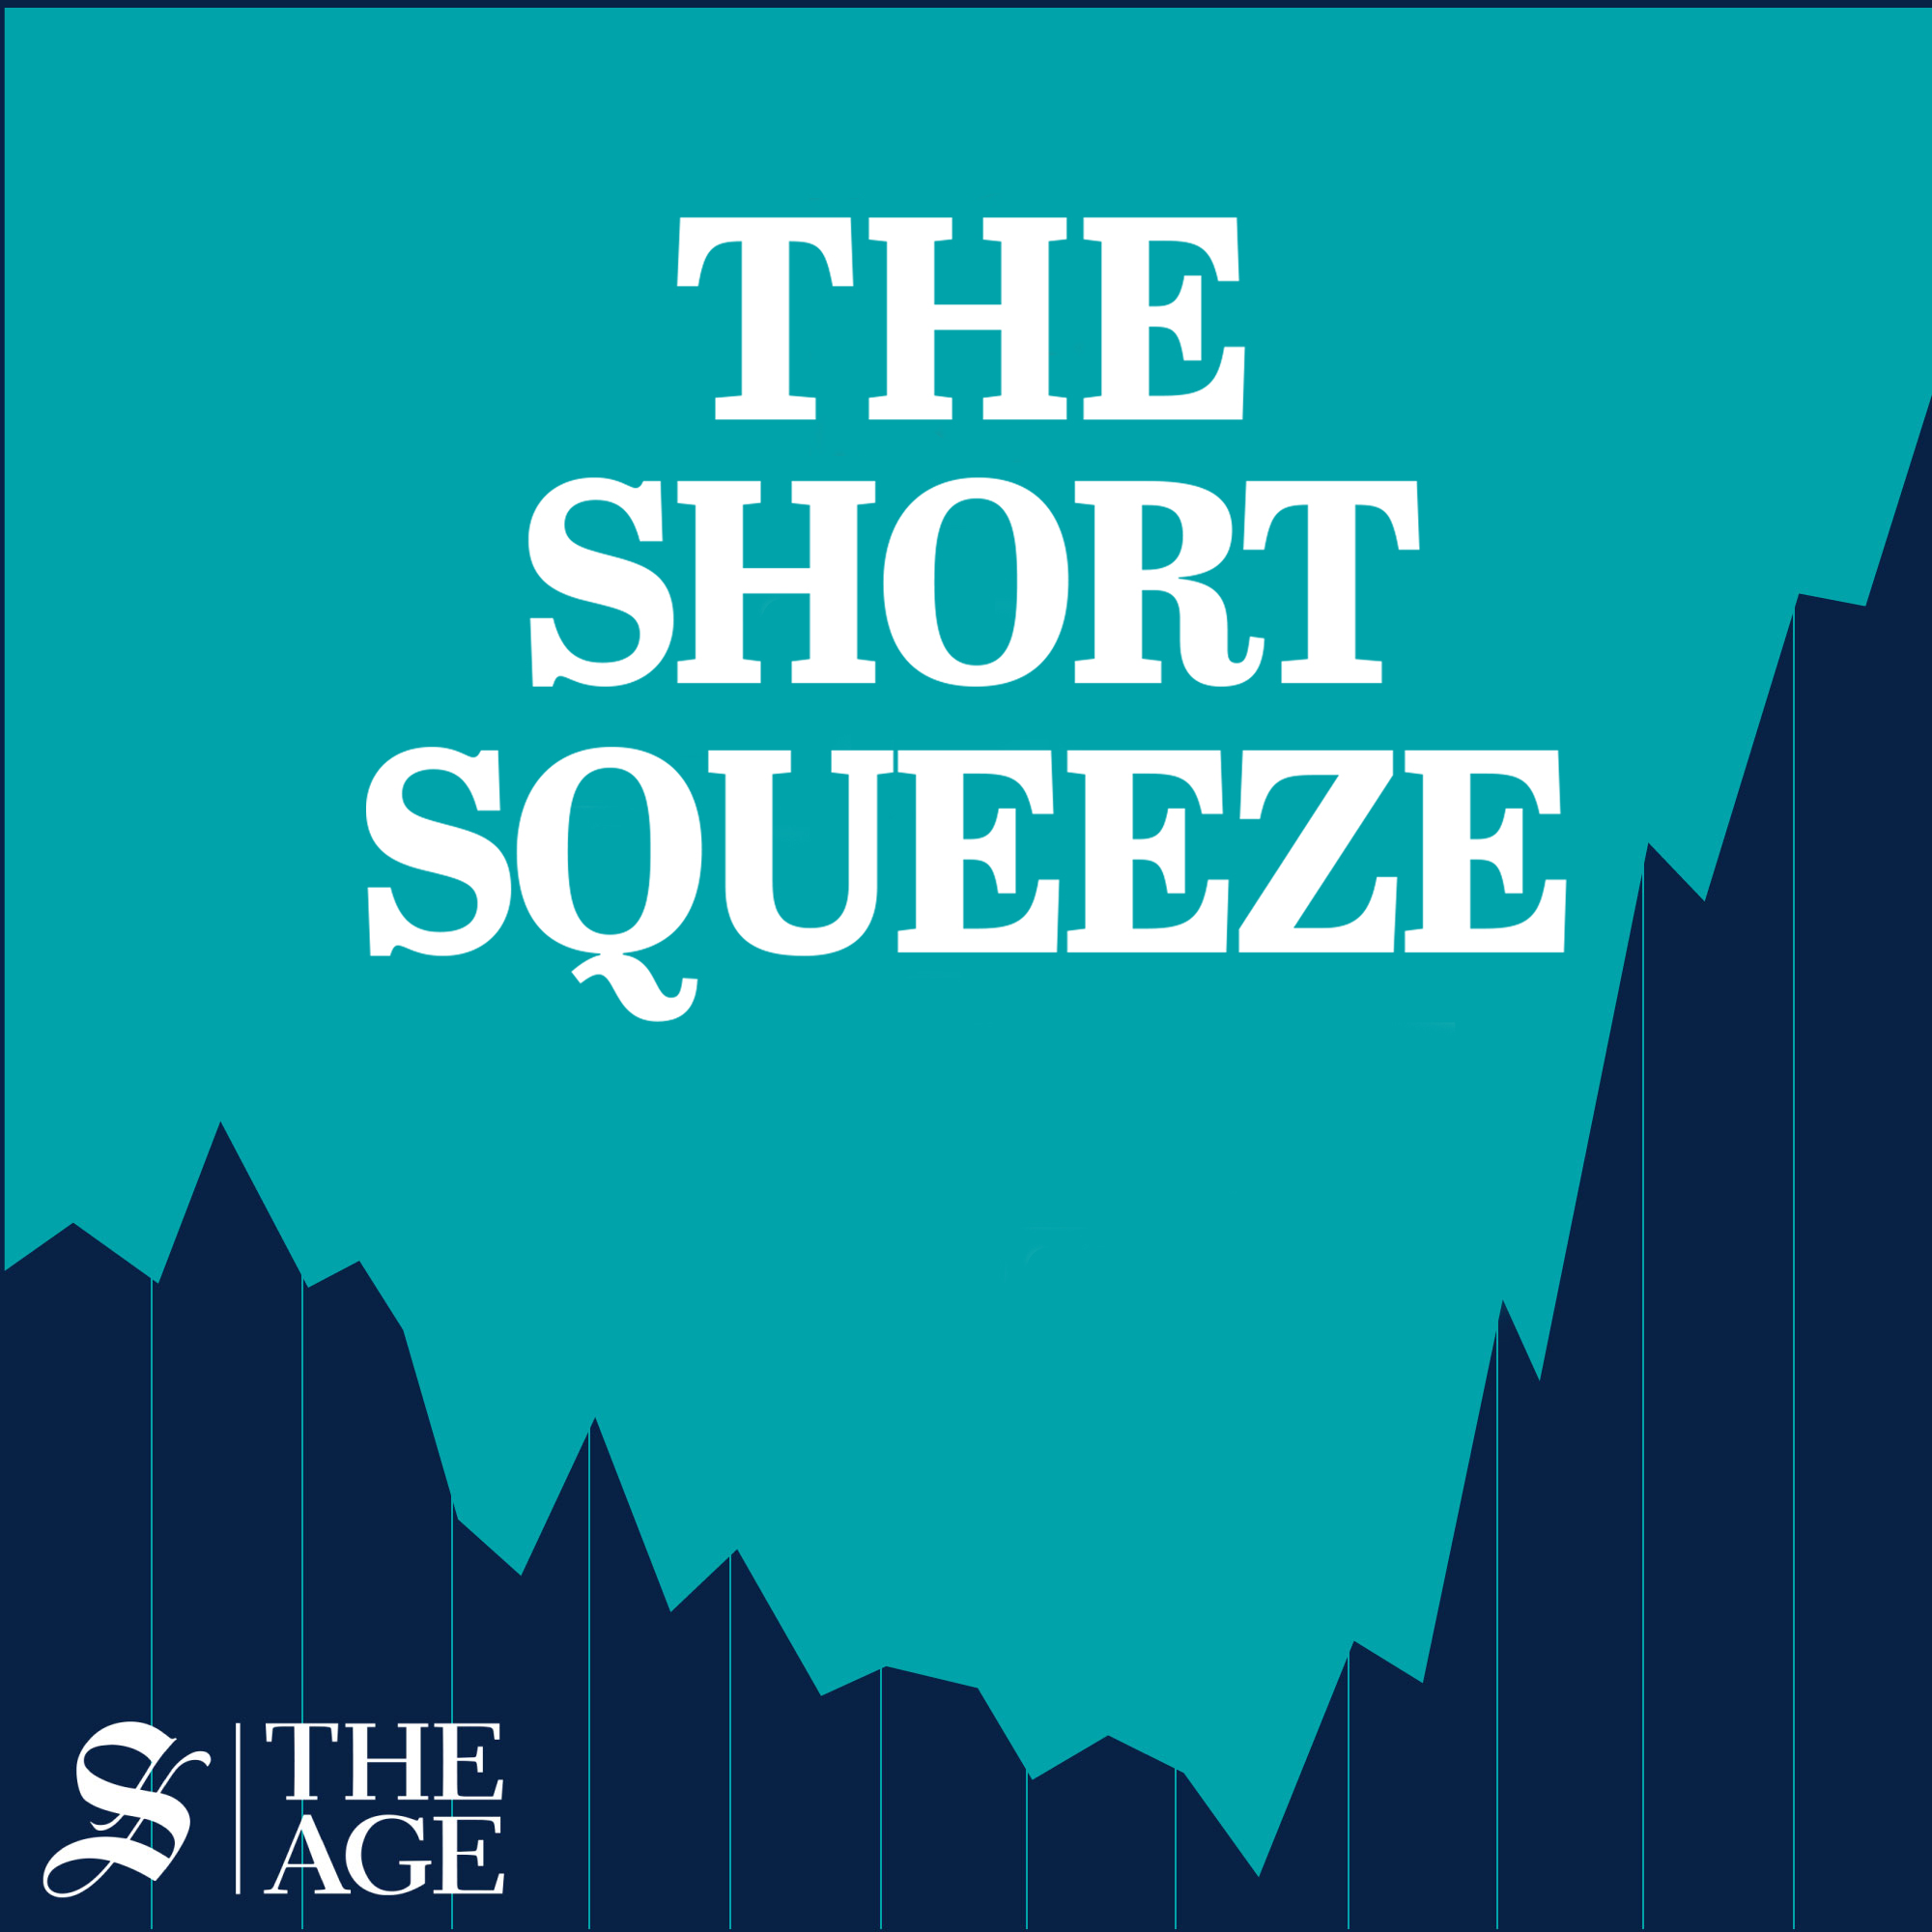 The Short Squeeze: February results paint rosy picture